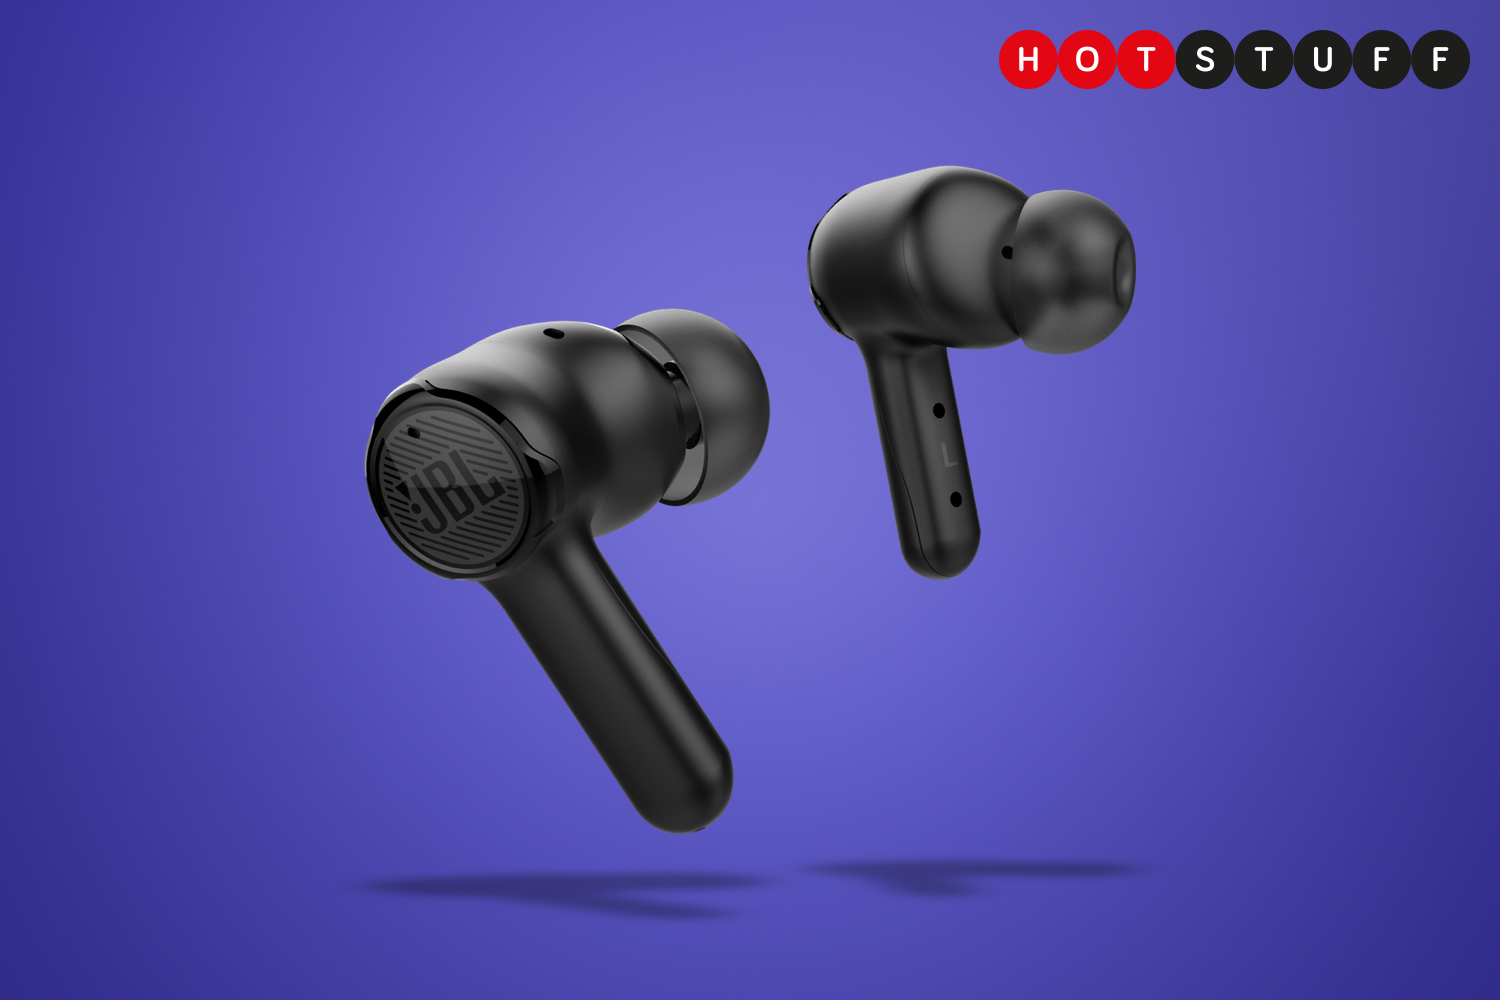 JBL's Quantum TWS are wireless gaming earbuds for immersive audio